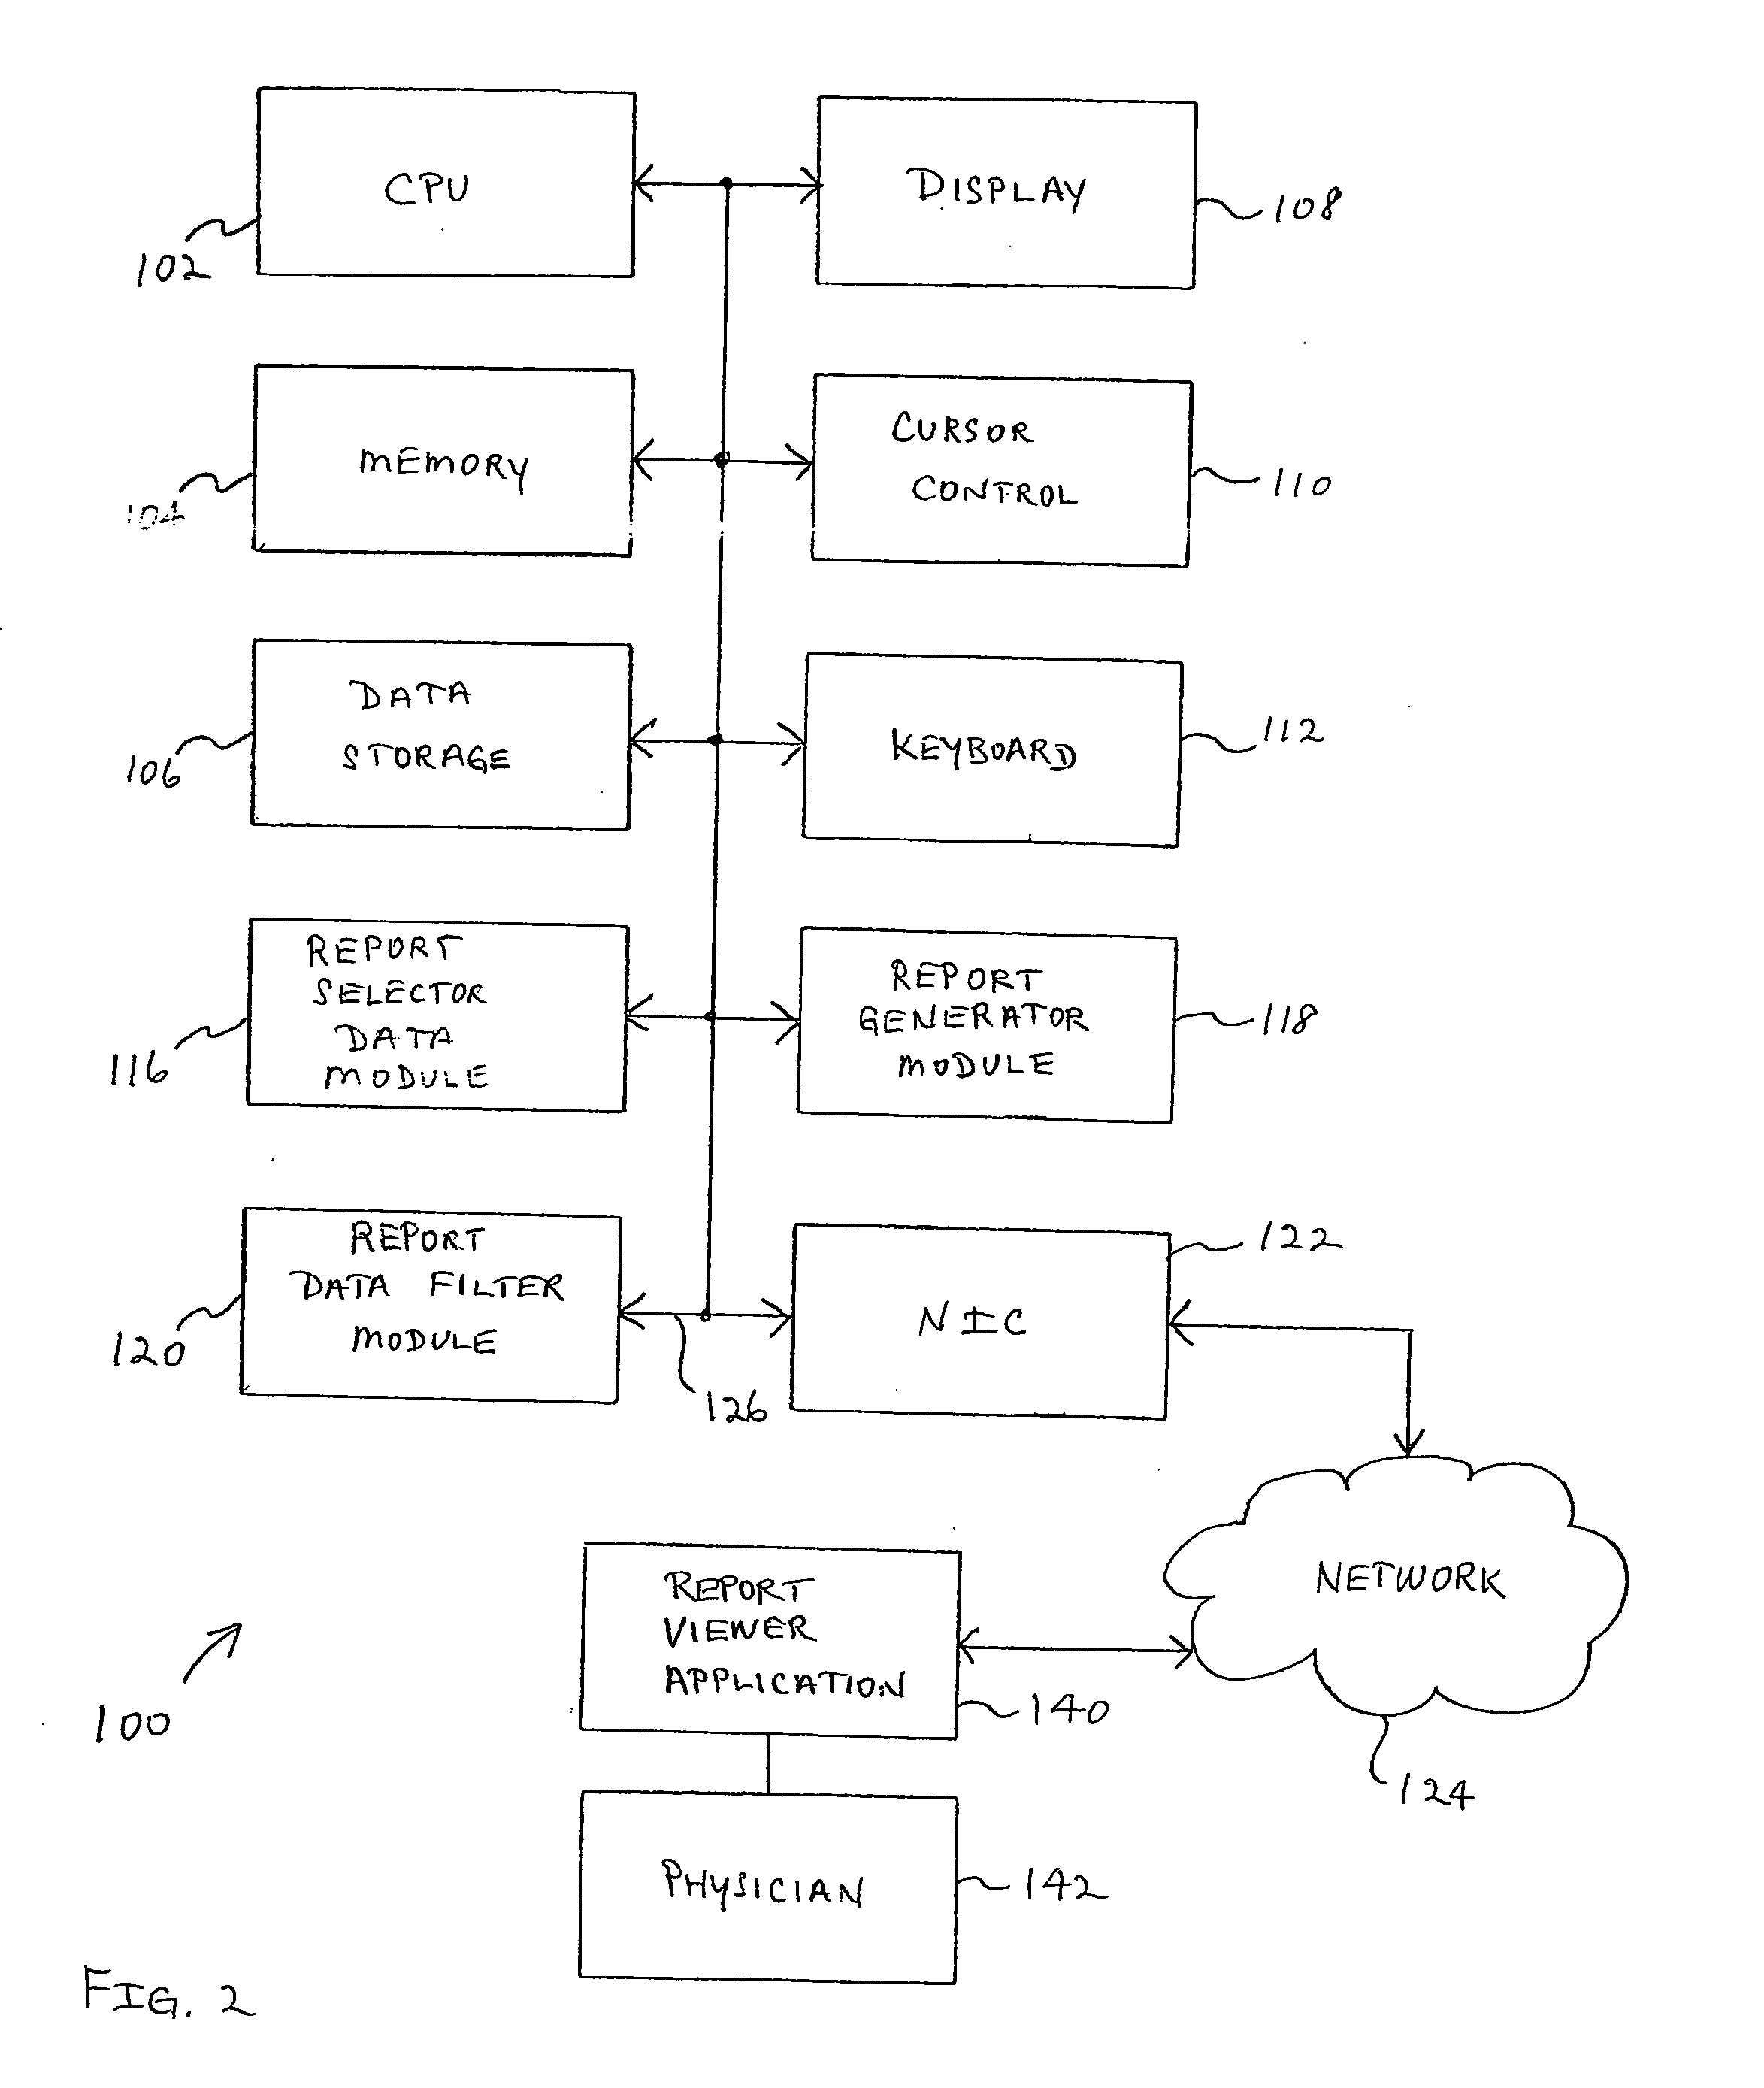 Apparatus and method for customized report viewer